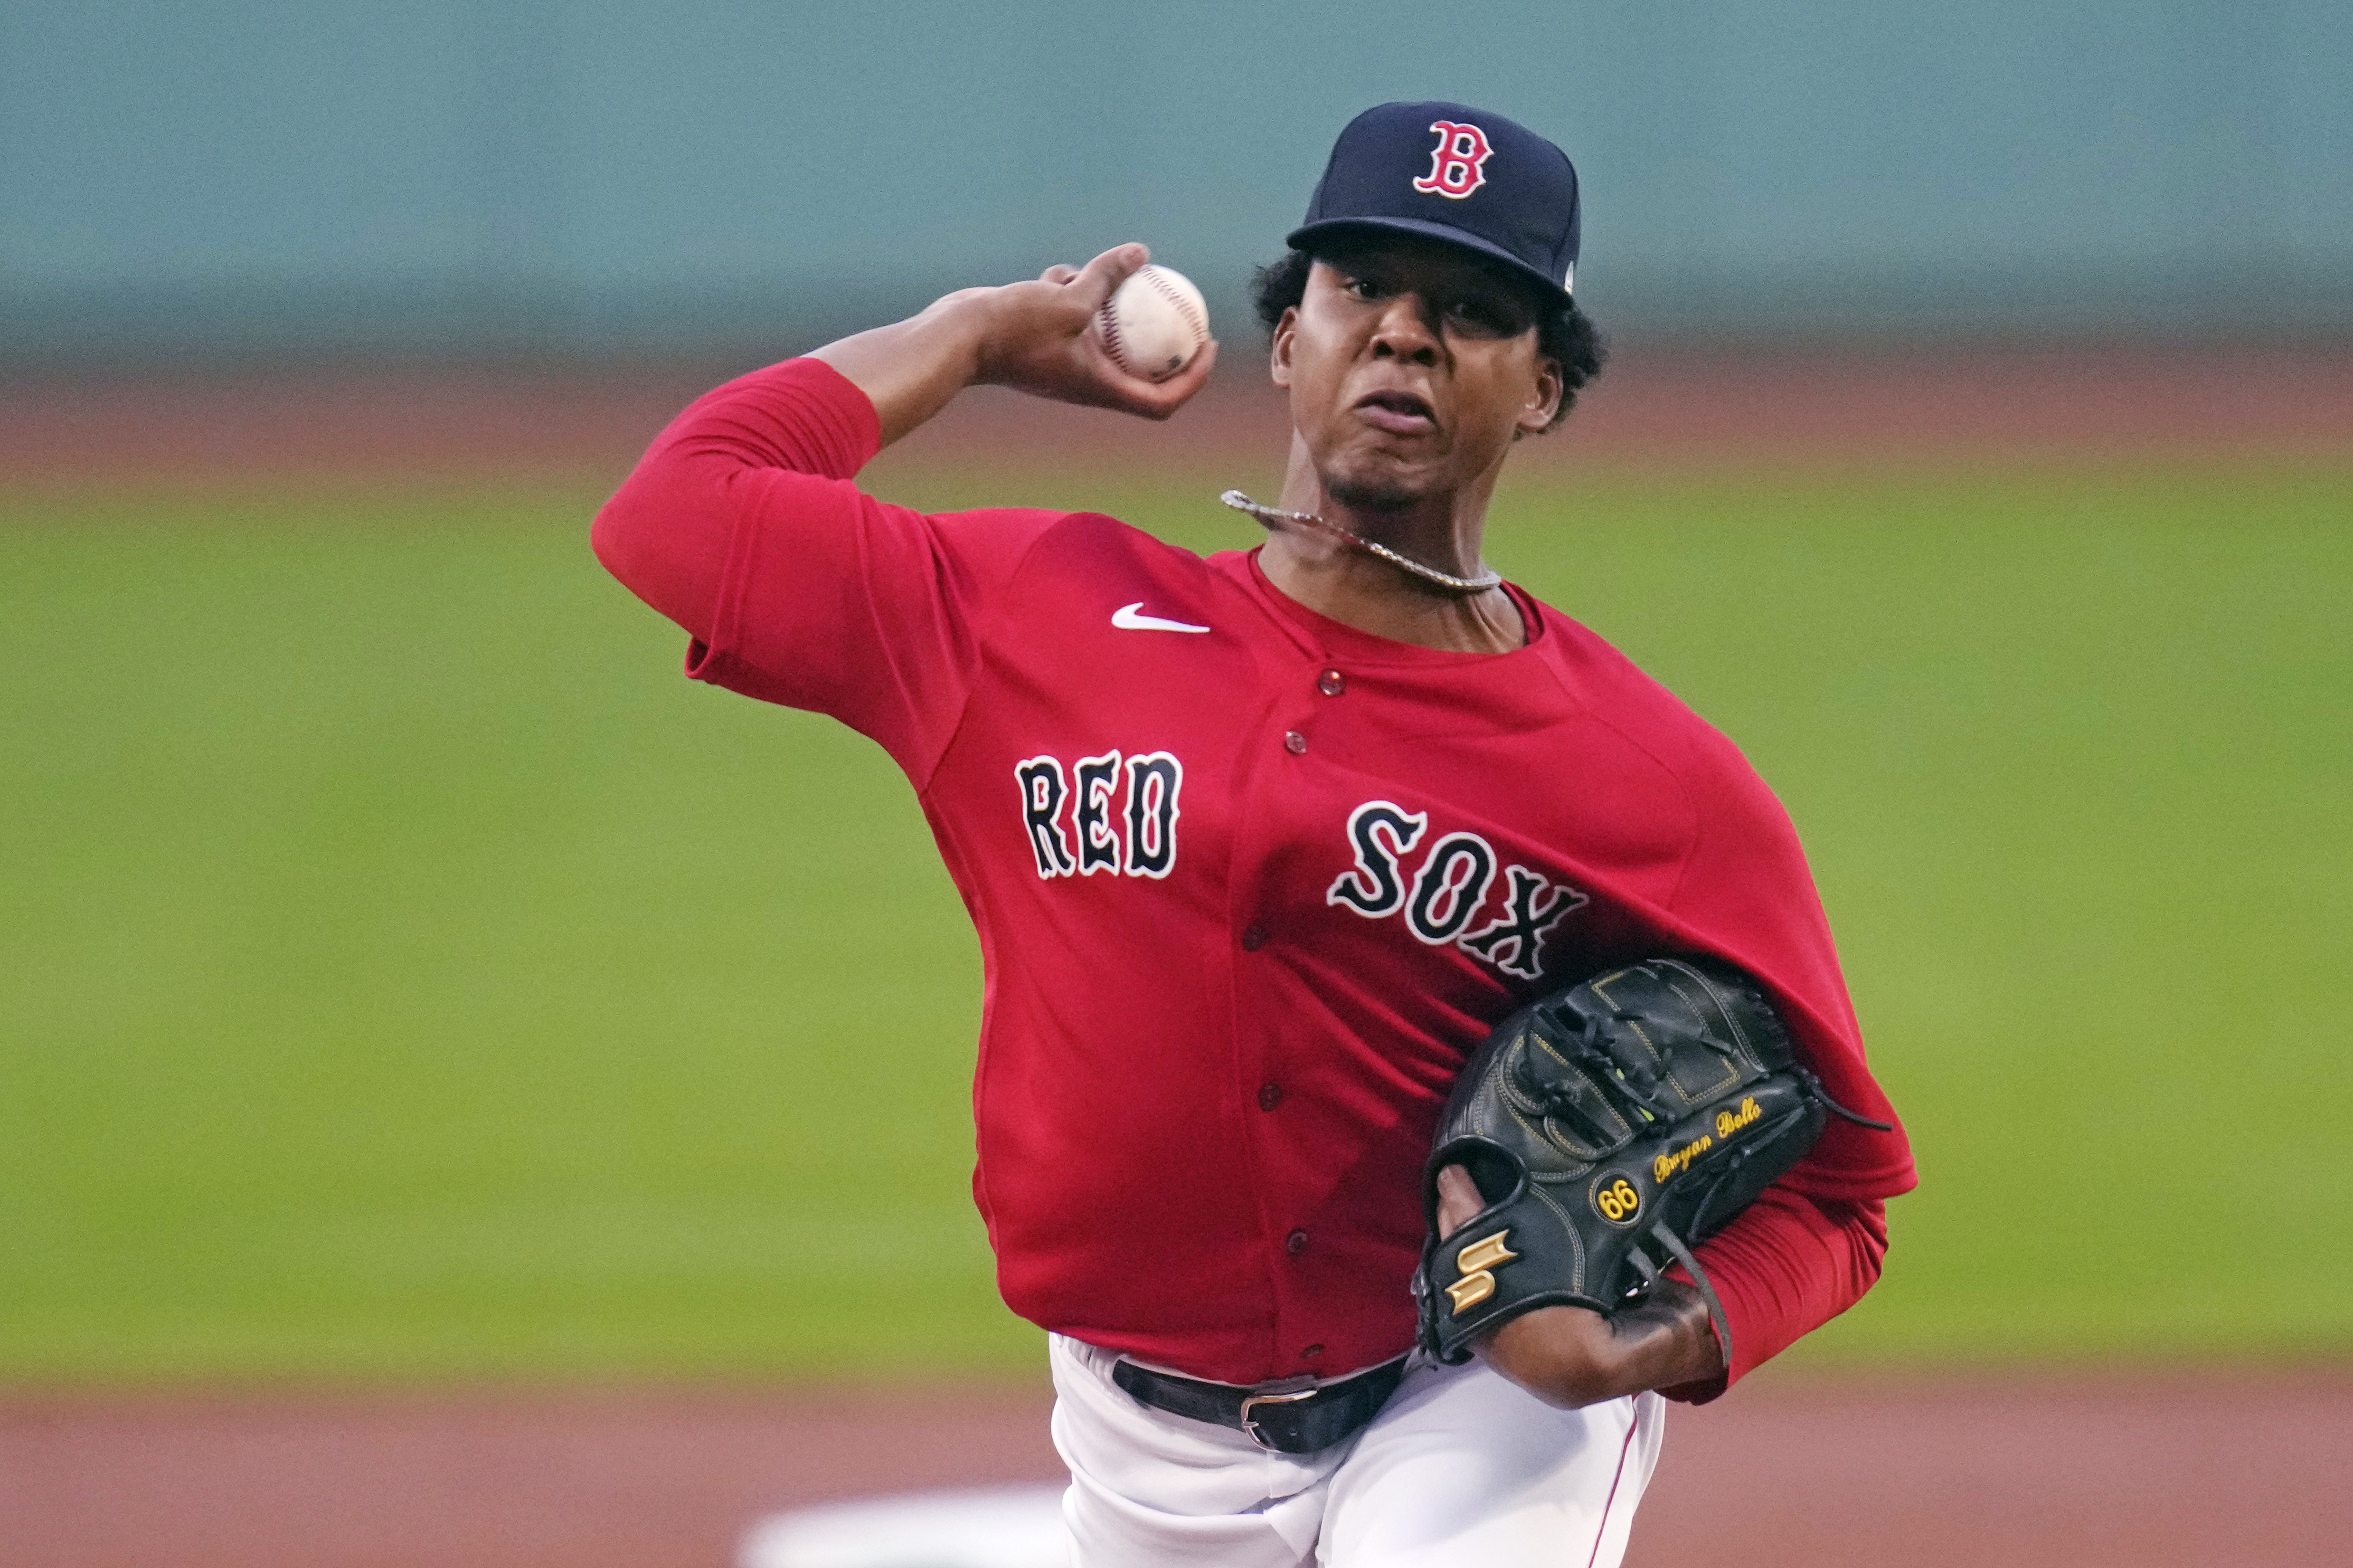 Red Sox righthander Brayan Bello's offseason plan included getting